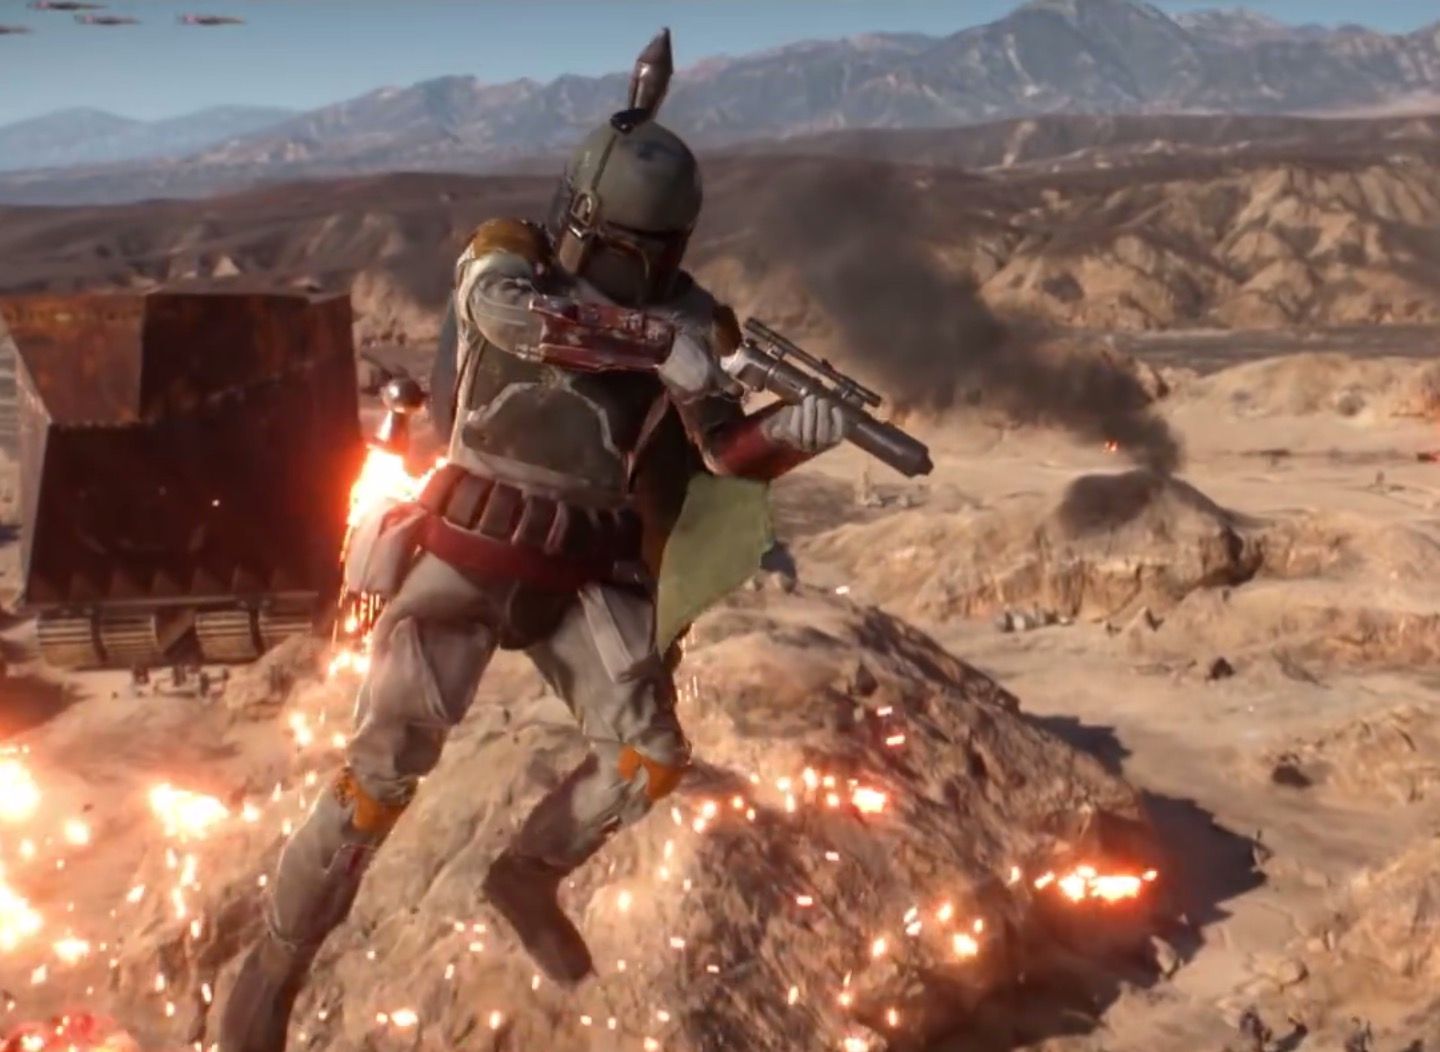 star wars battlefront game premieres at fan convention watch the trailer here image 1